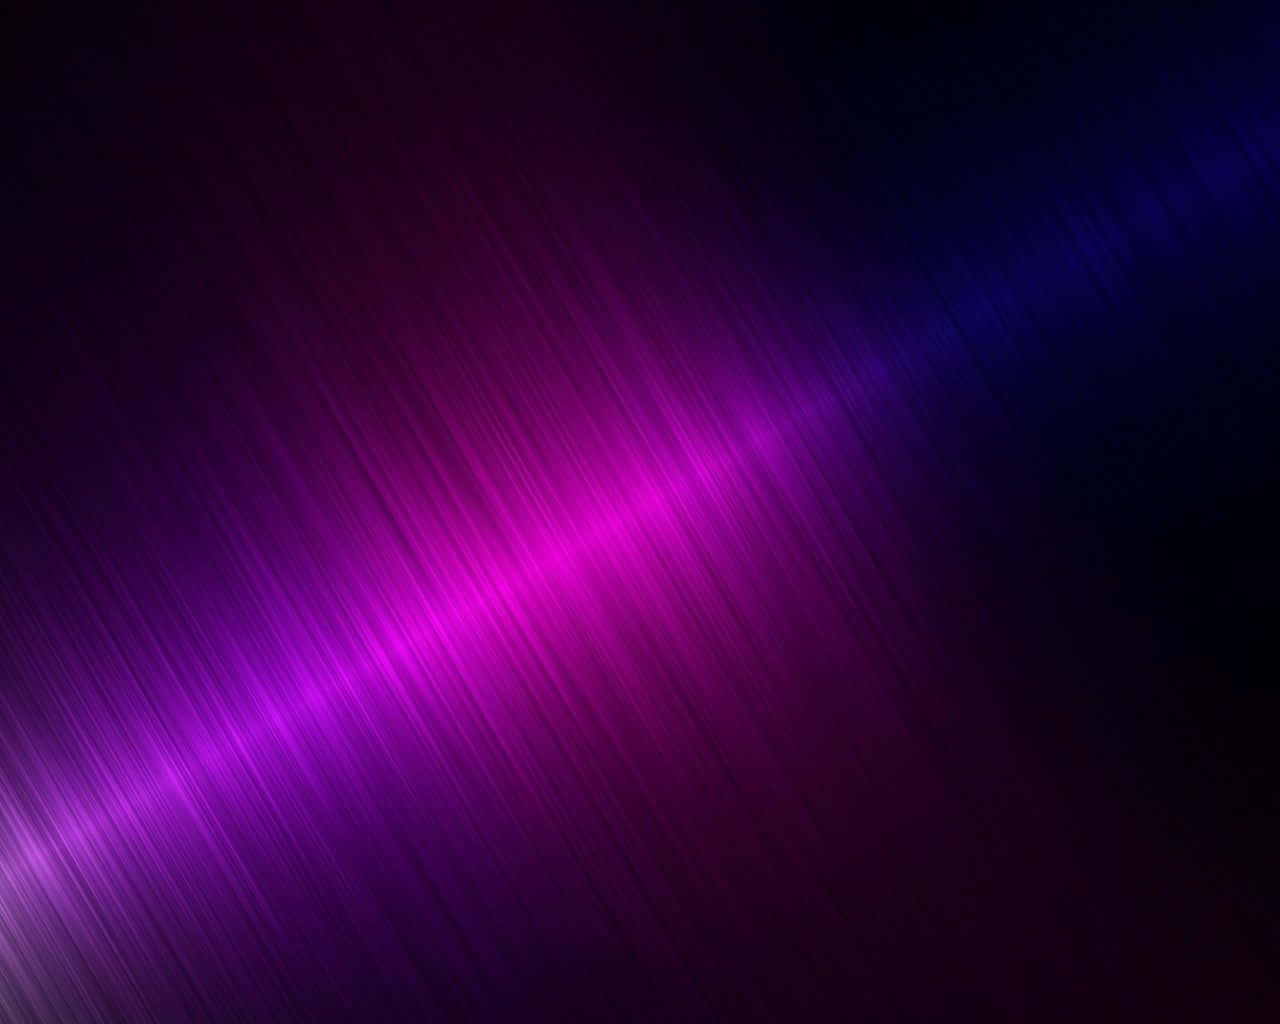 Upgrade Your Desktop with A Vibrant Purple Wallpaper